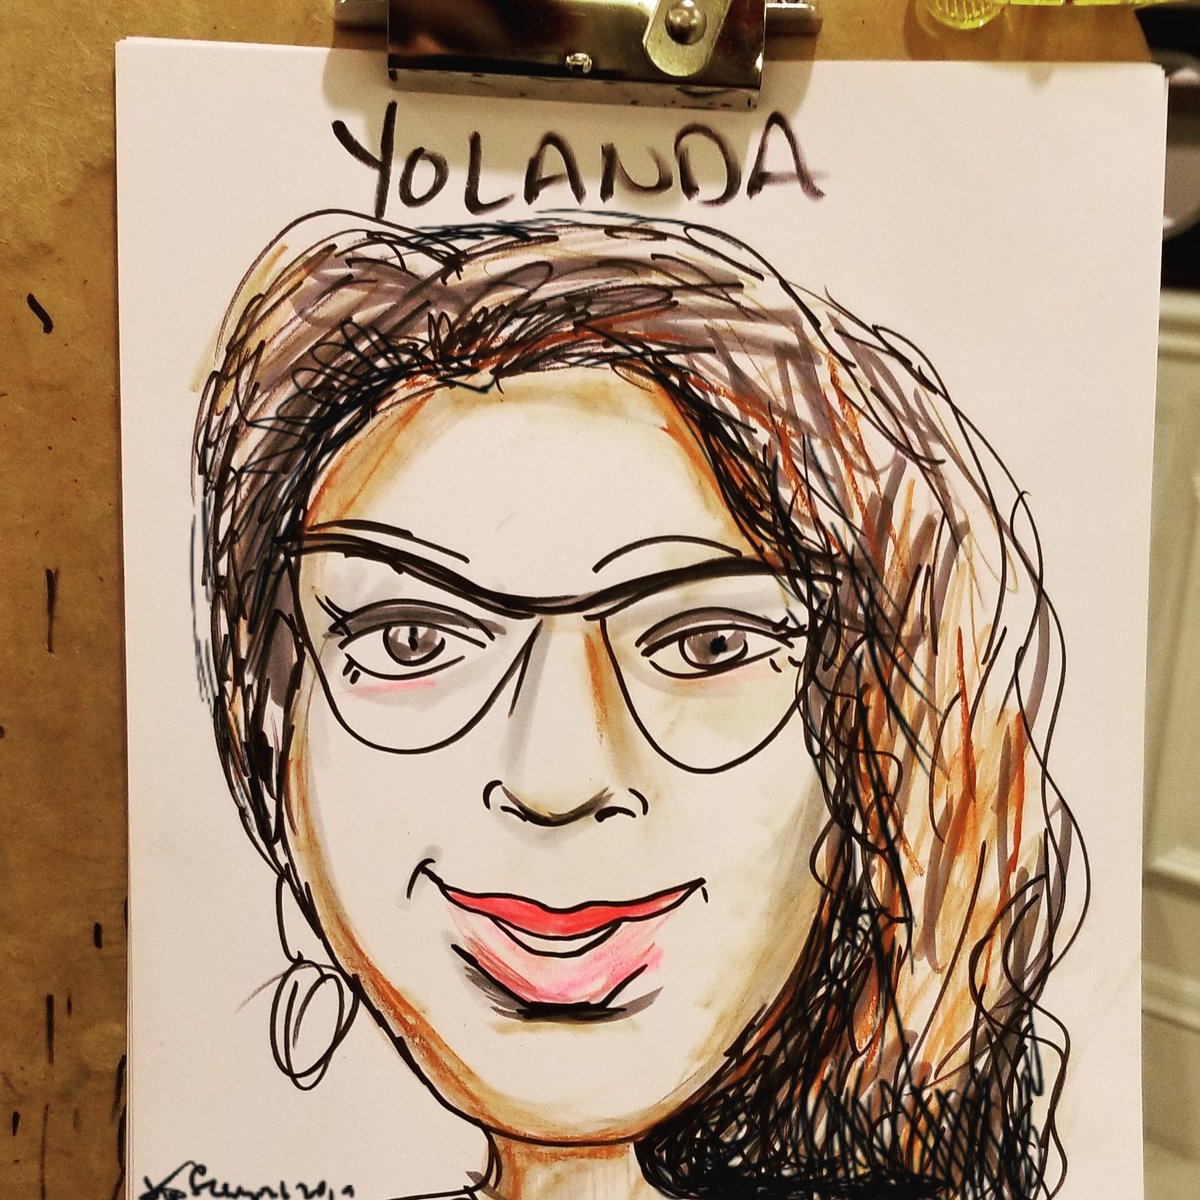 50th #BirthdayParty in #LakeWorthFlorida near #WestPalmBeach for a beloved #SocialWorker included #Caricature drawings by #DelrayBeach and #MiamiCaricatureArtist Jeff Sterling from FloridaCaricatures.Com